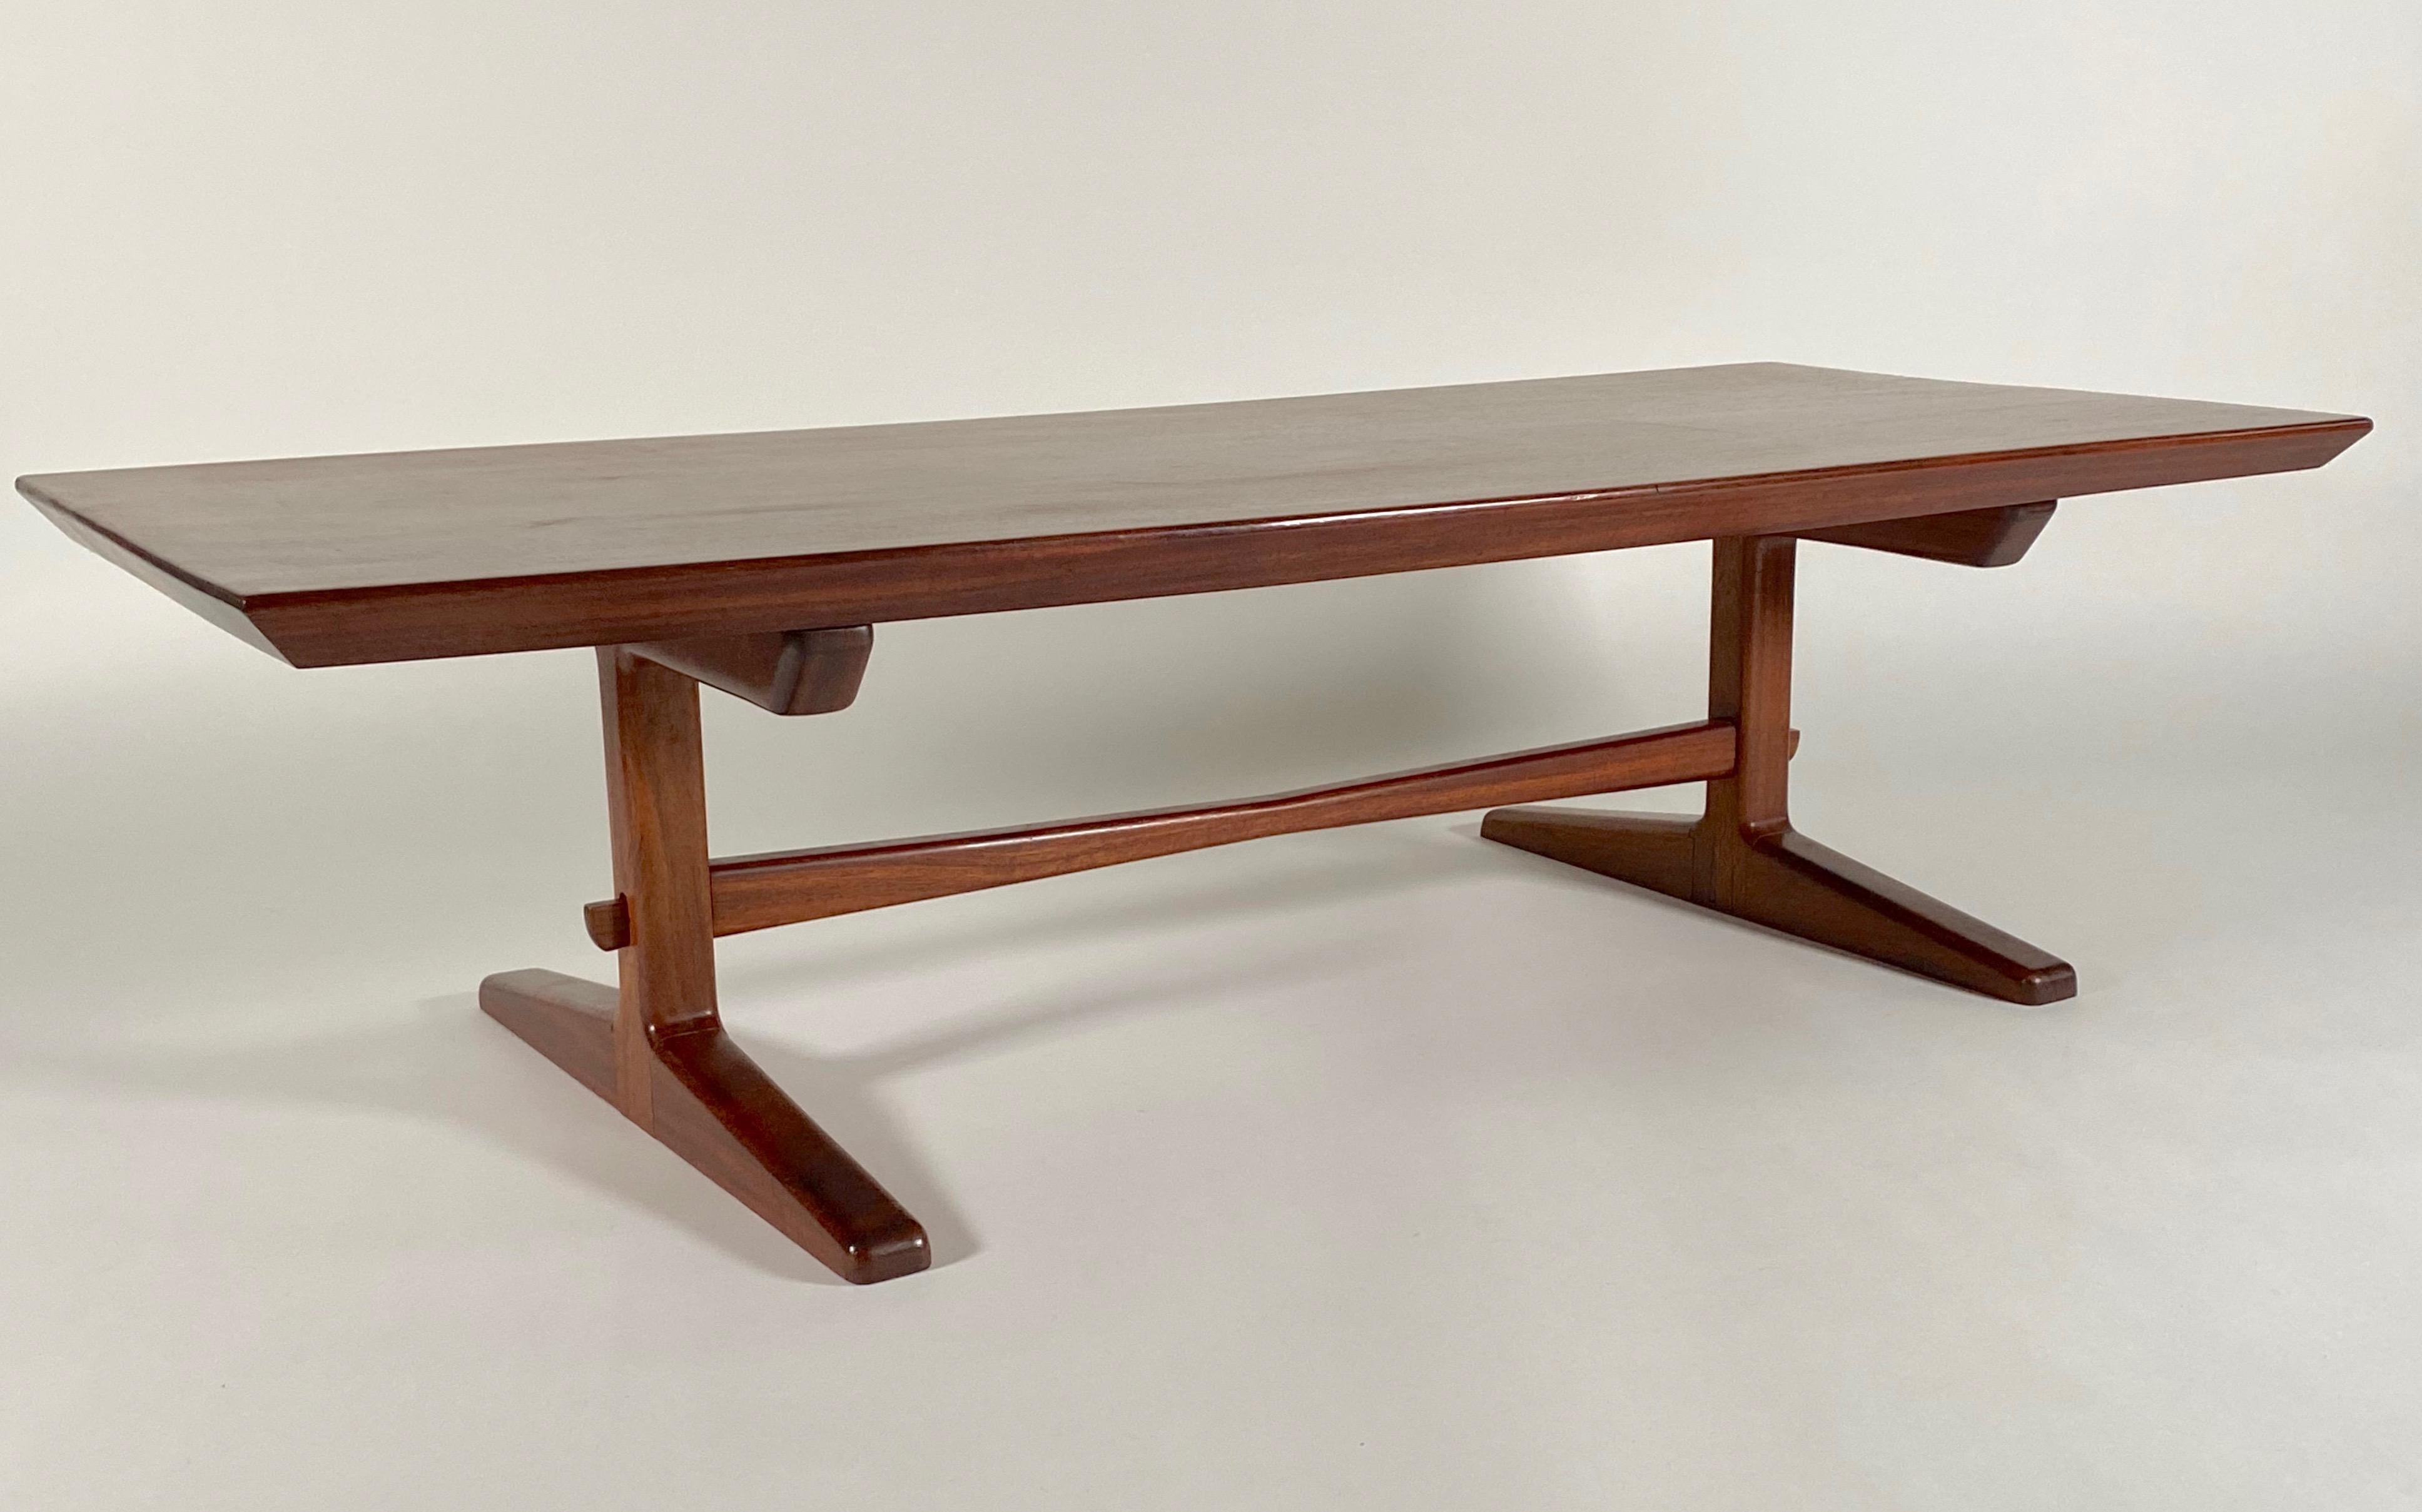 Studio made circa 1970s solid mahogany coffee with trestle legs and a beveled edged top with two butterfly repairs to the underside, a stretcher bar underneath adds support and form to the table. Richly grained and colored mahogany, this is a very